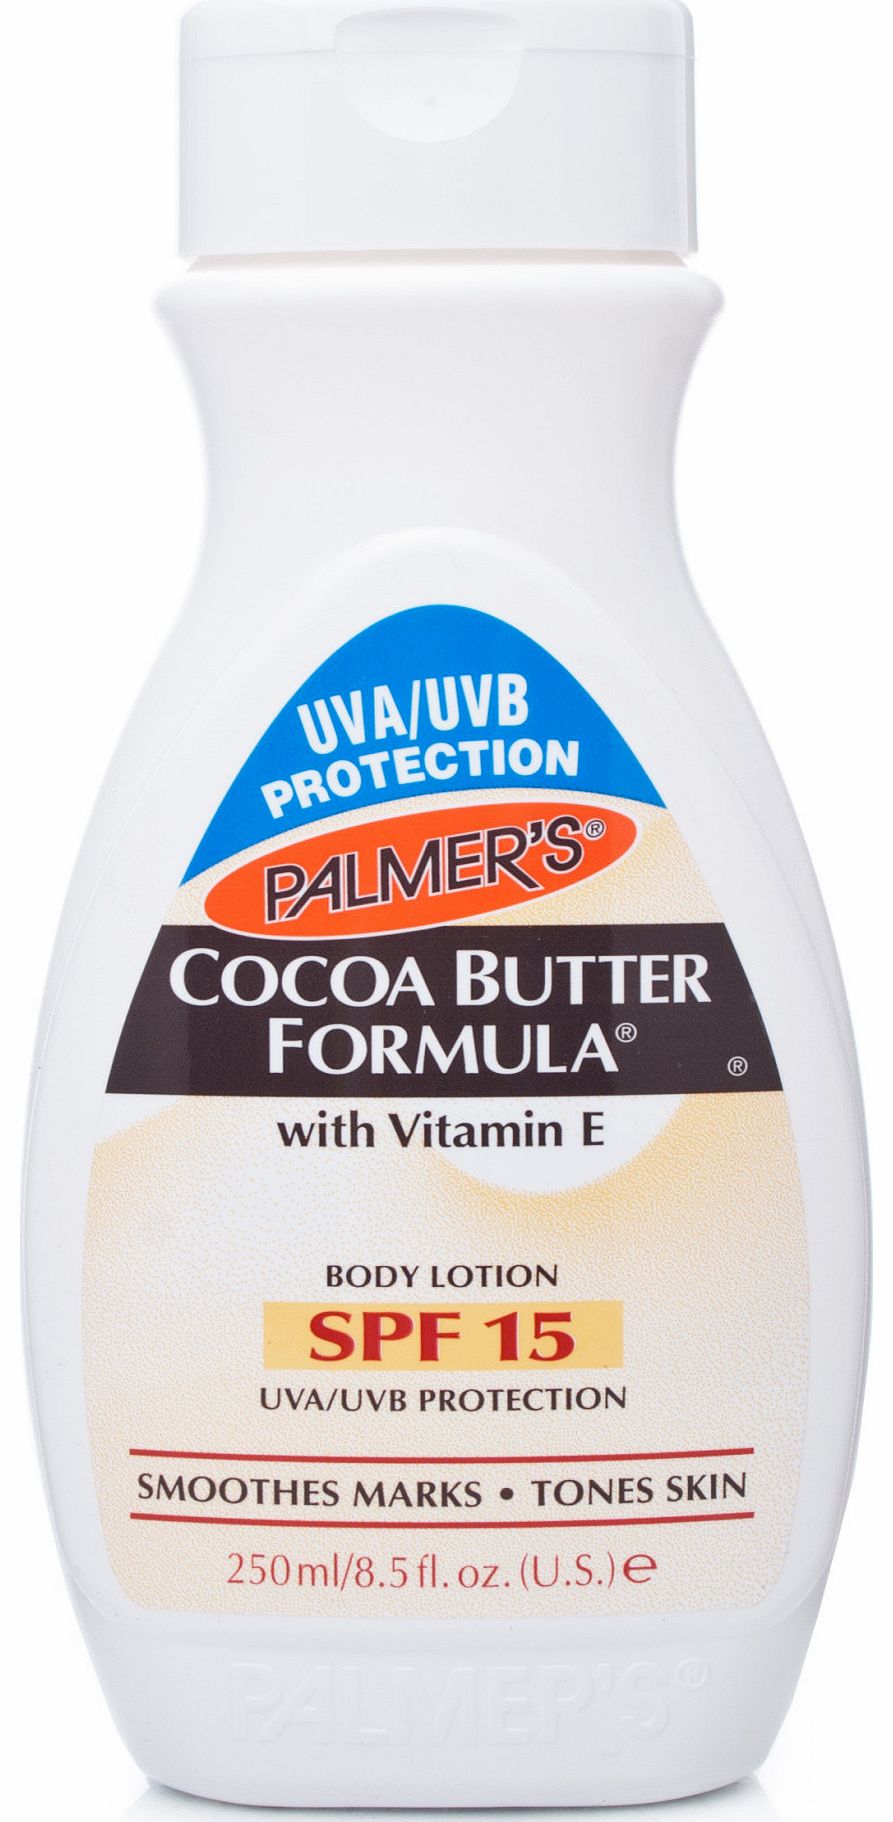 Palmers Cocoa Butter Formula Lotion SPF15